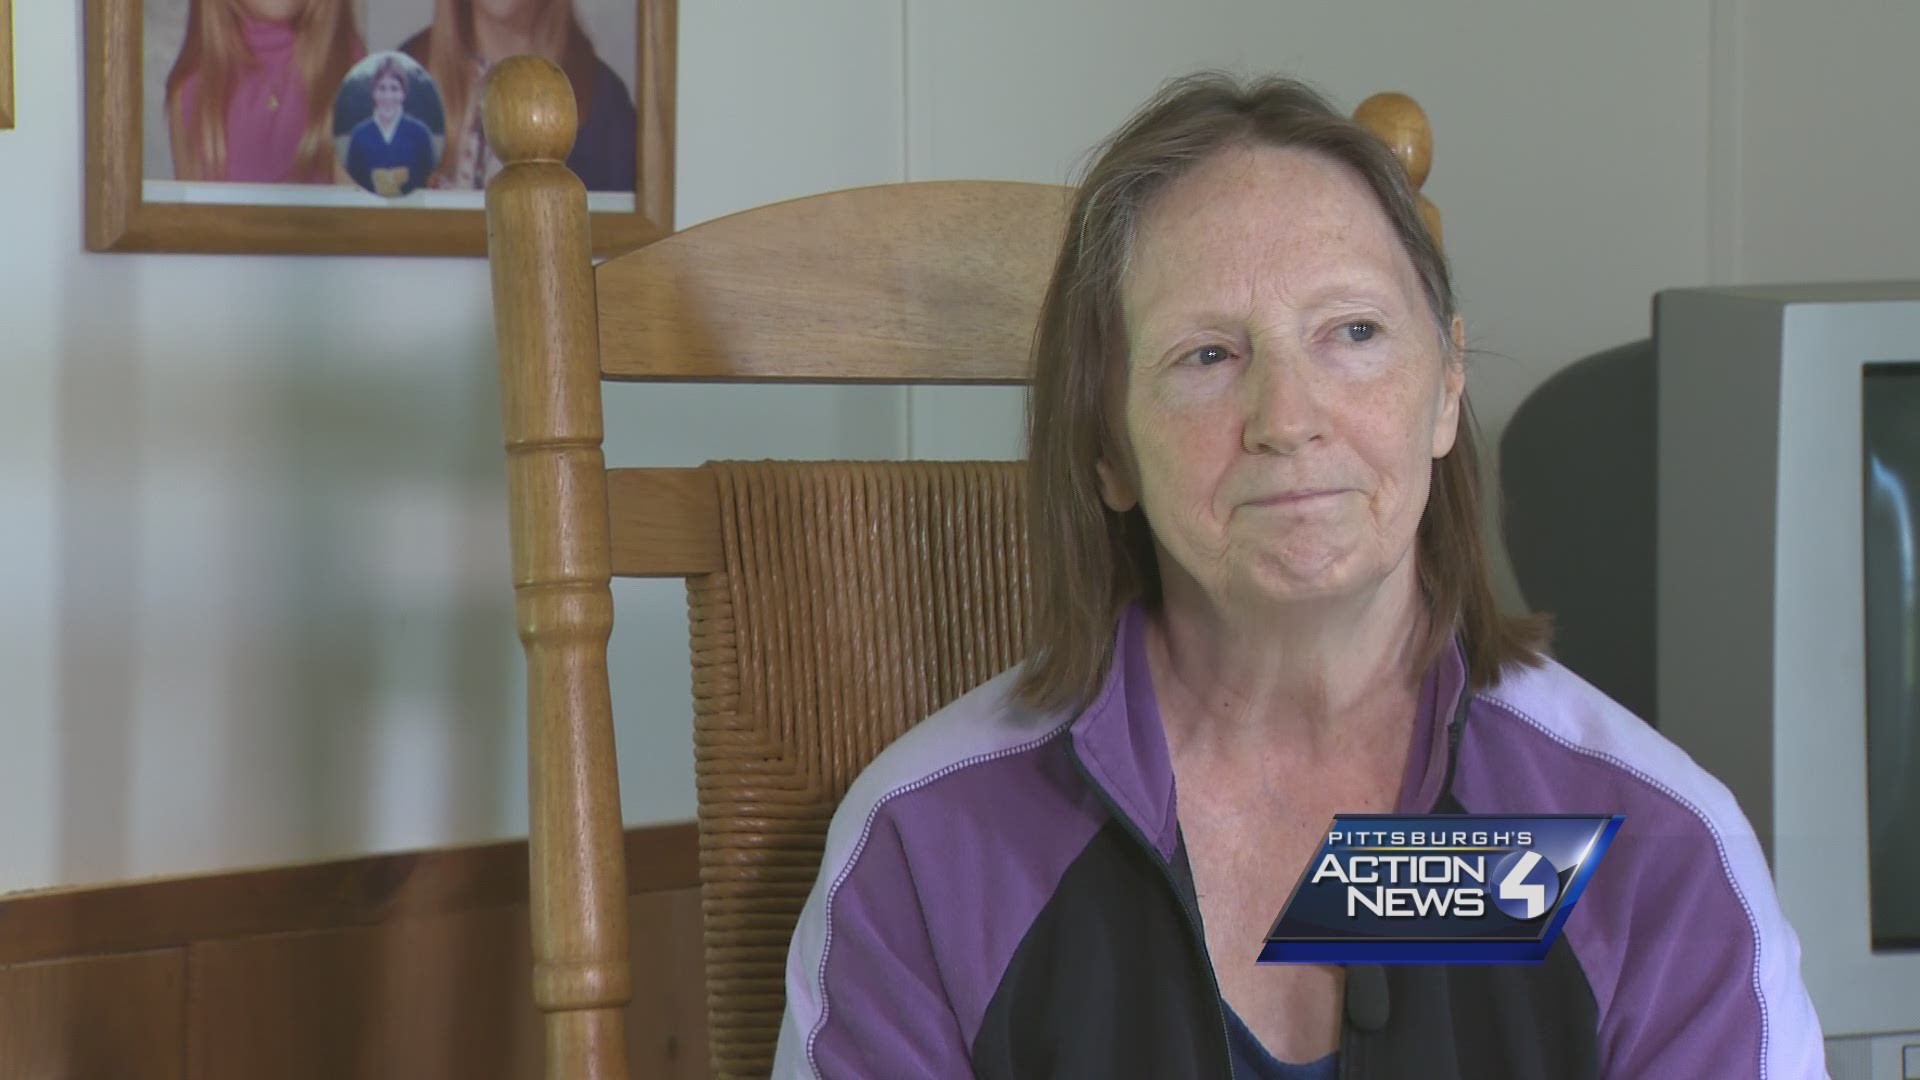 Kimberly Kessler's mother spoke with WTAE about her daughter.